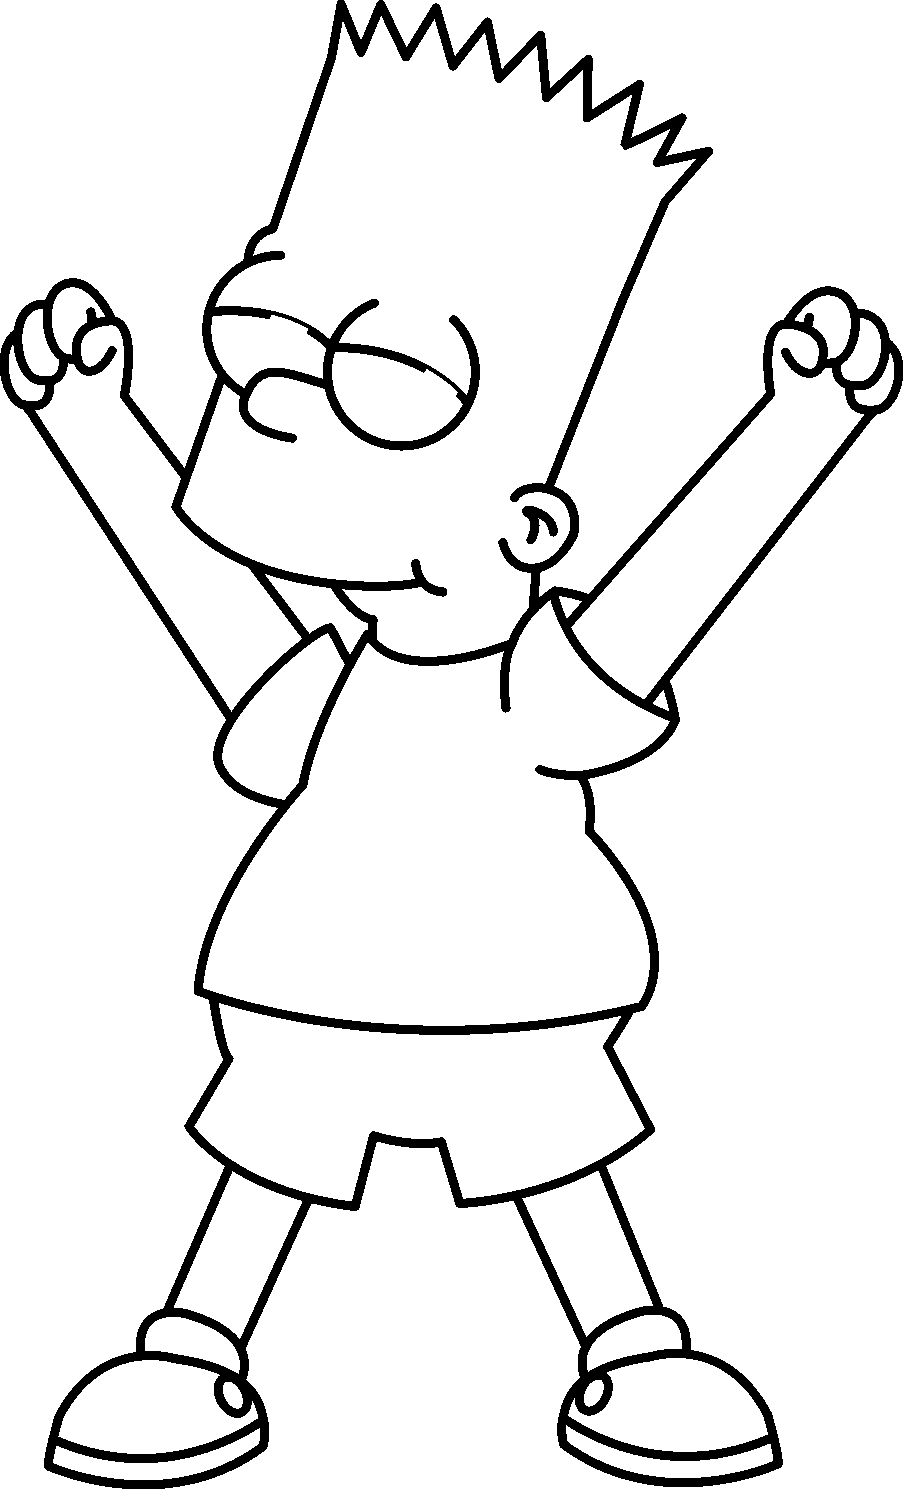 simpsons coloring pages cartoons coloring pages lisa simpsons coloring pages simpsons coloring pages 